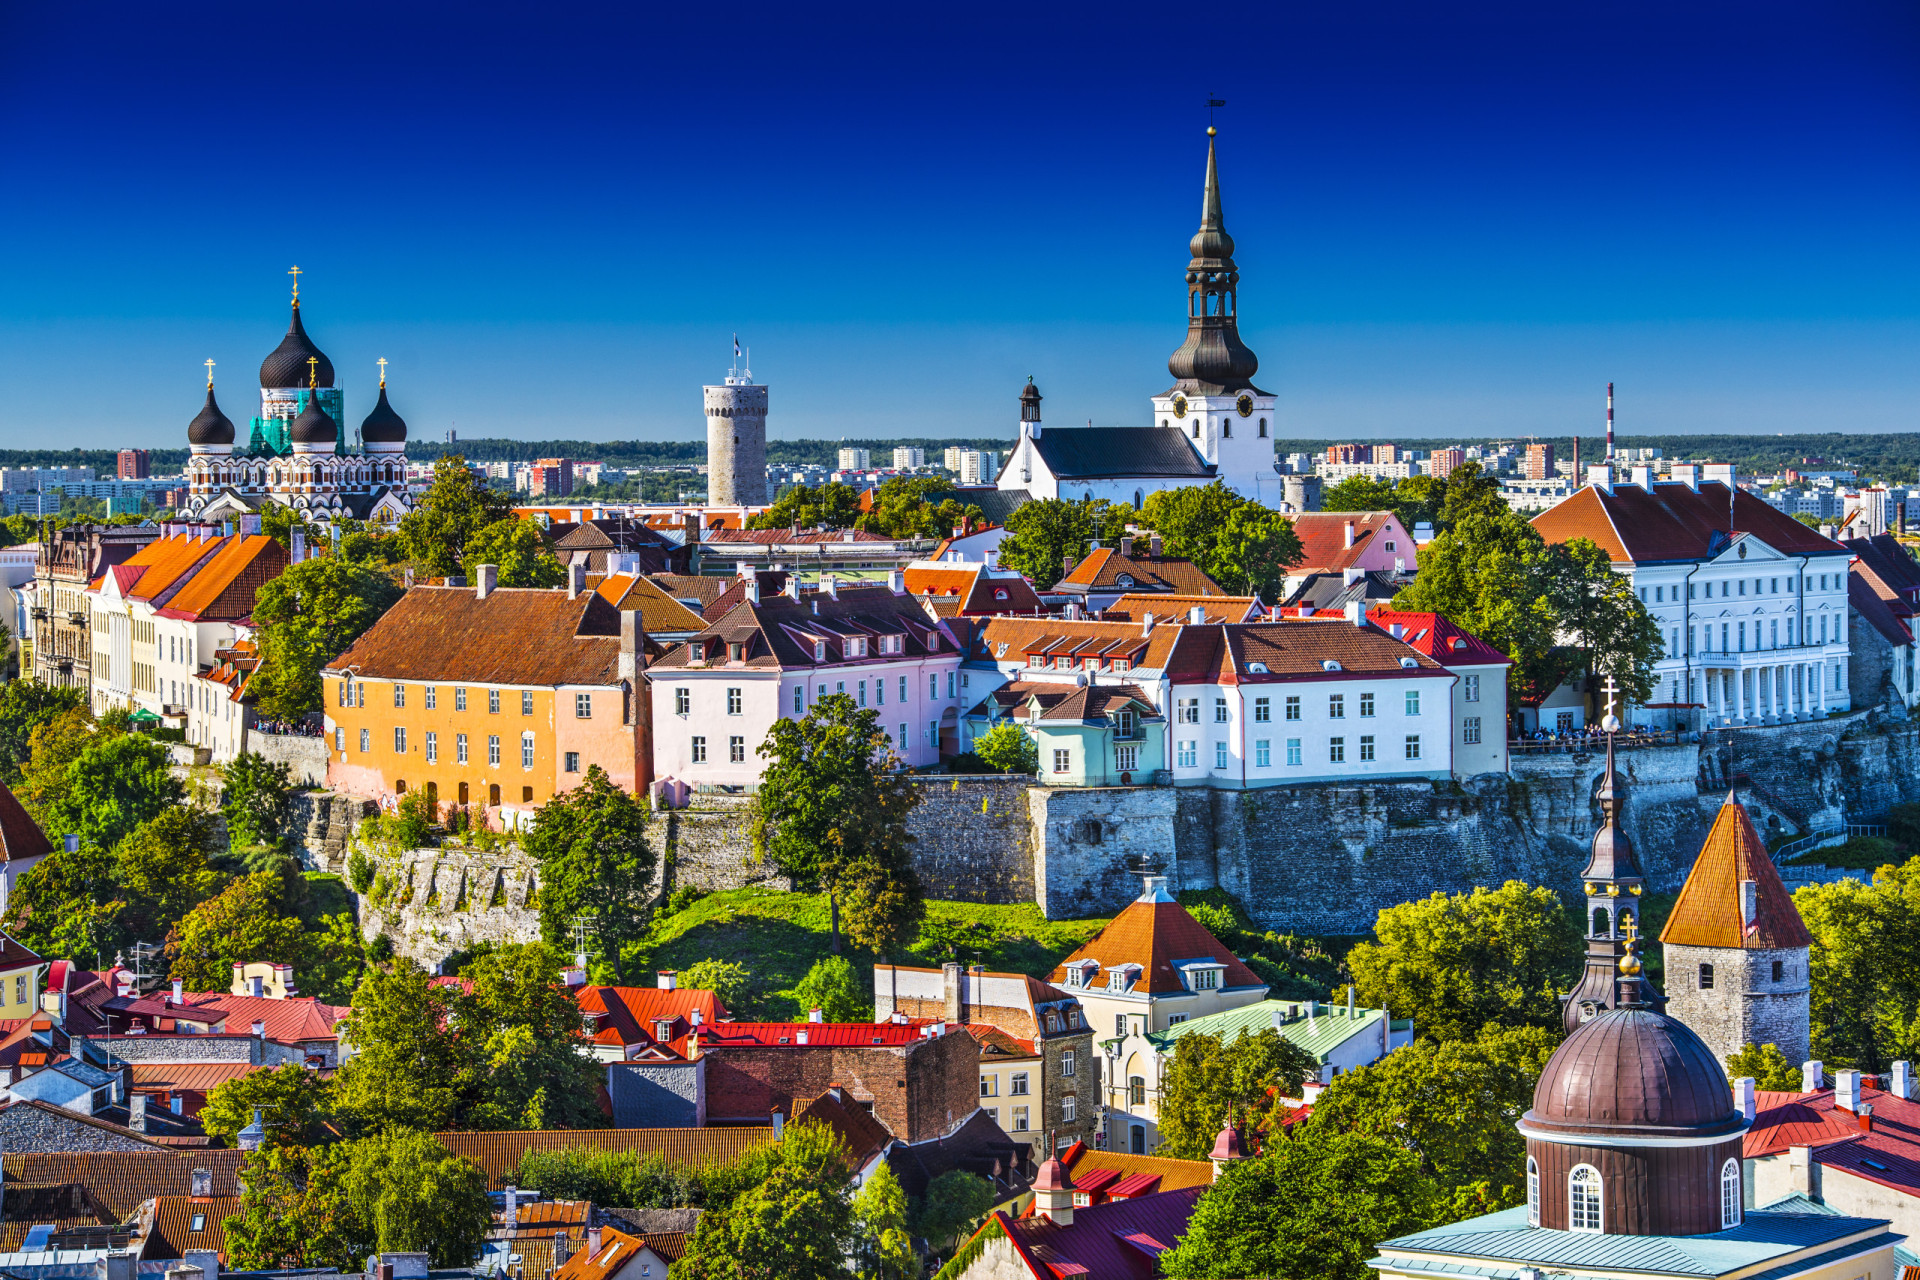 <p>Tallin is often included on "best of" lists, and for good reason. Next year, the Estonian capital is Europe's Capital of Culture for 2024. UNESCO long ago declared its walled Old Town a World Heritage Site for showcasing some of the best-preserved examples of medieval architecture found anywhere.</p>